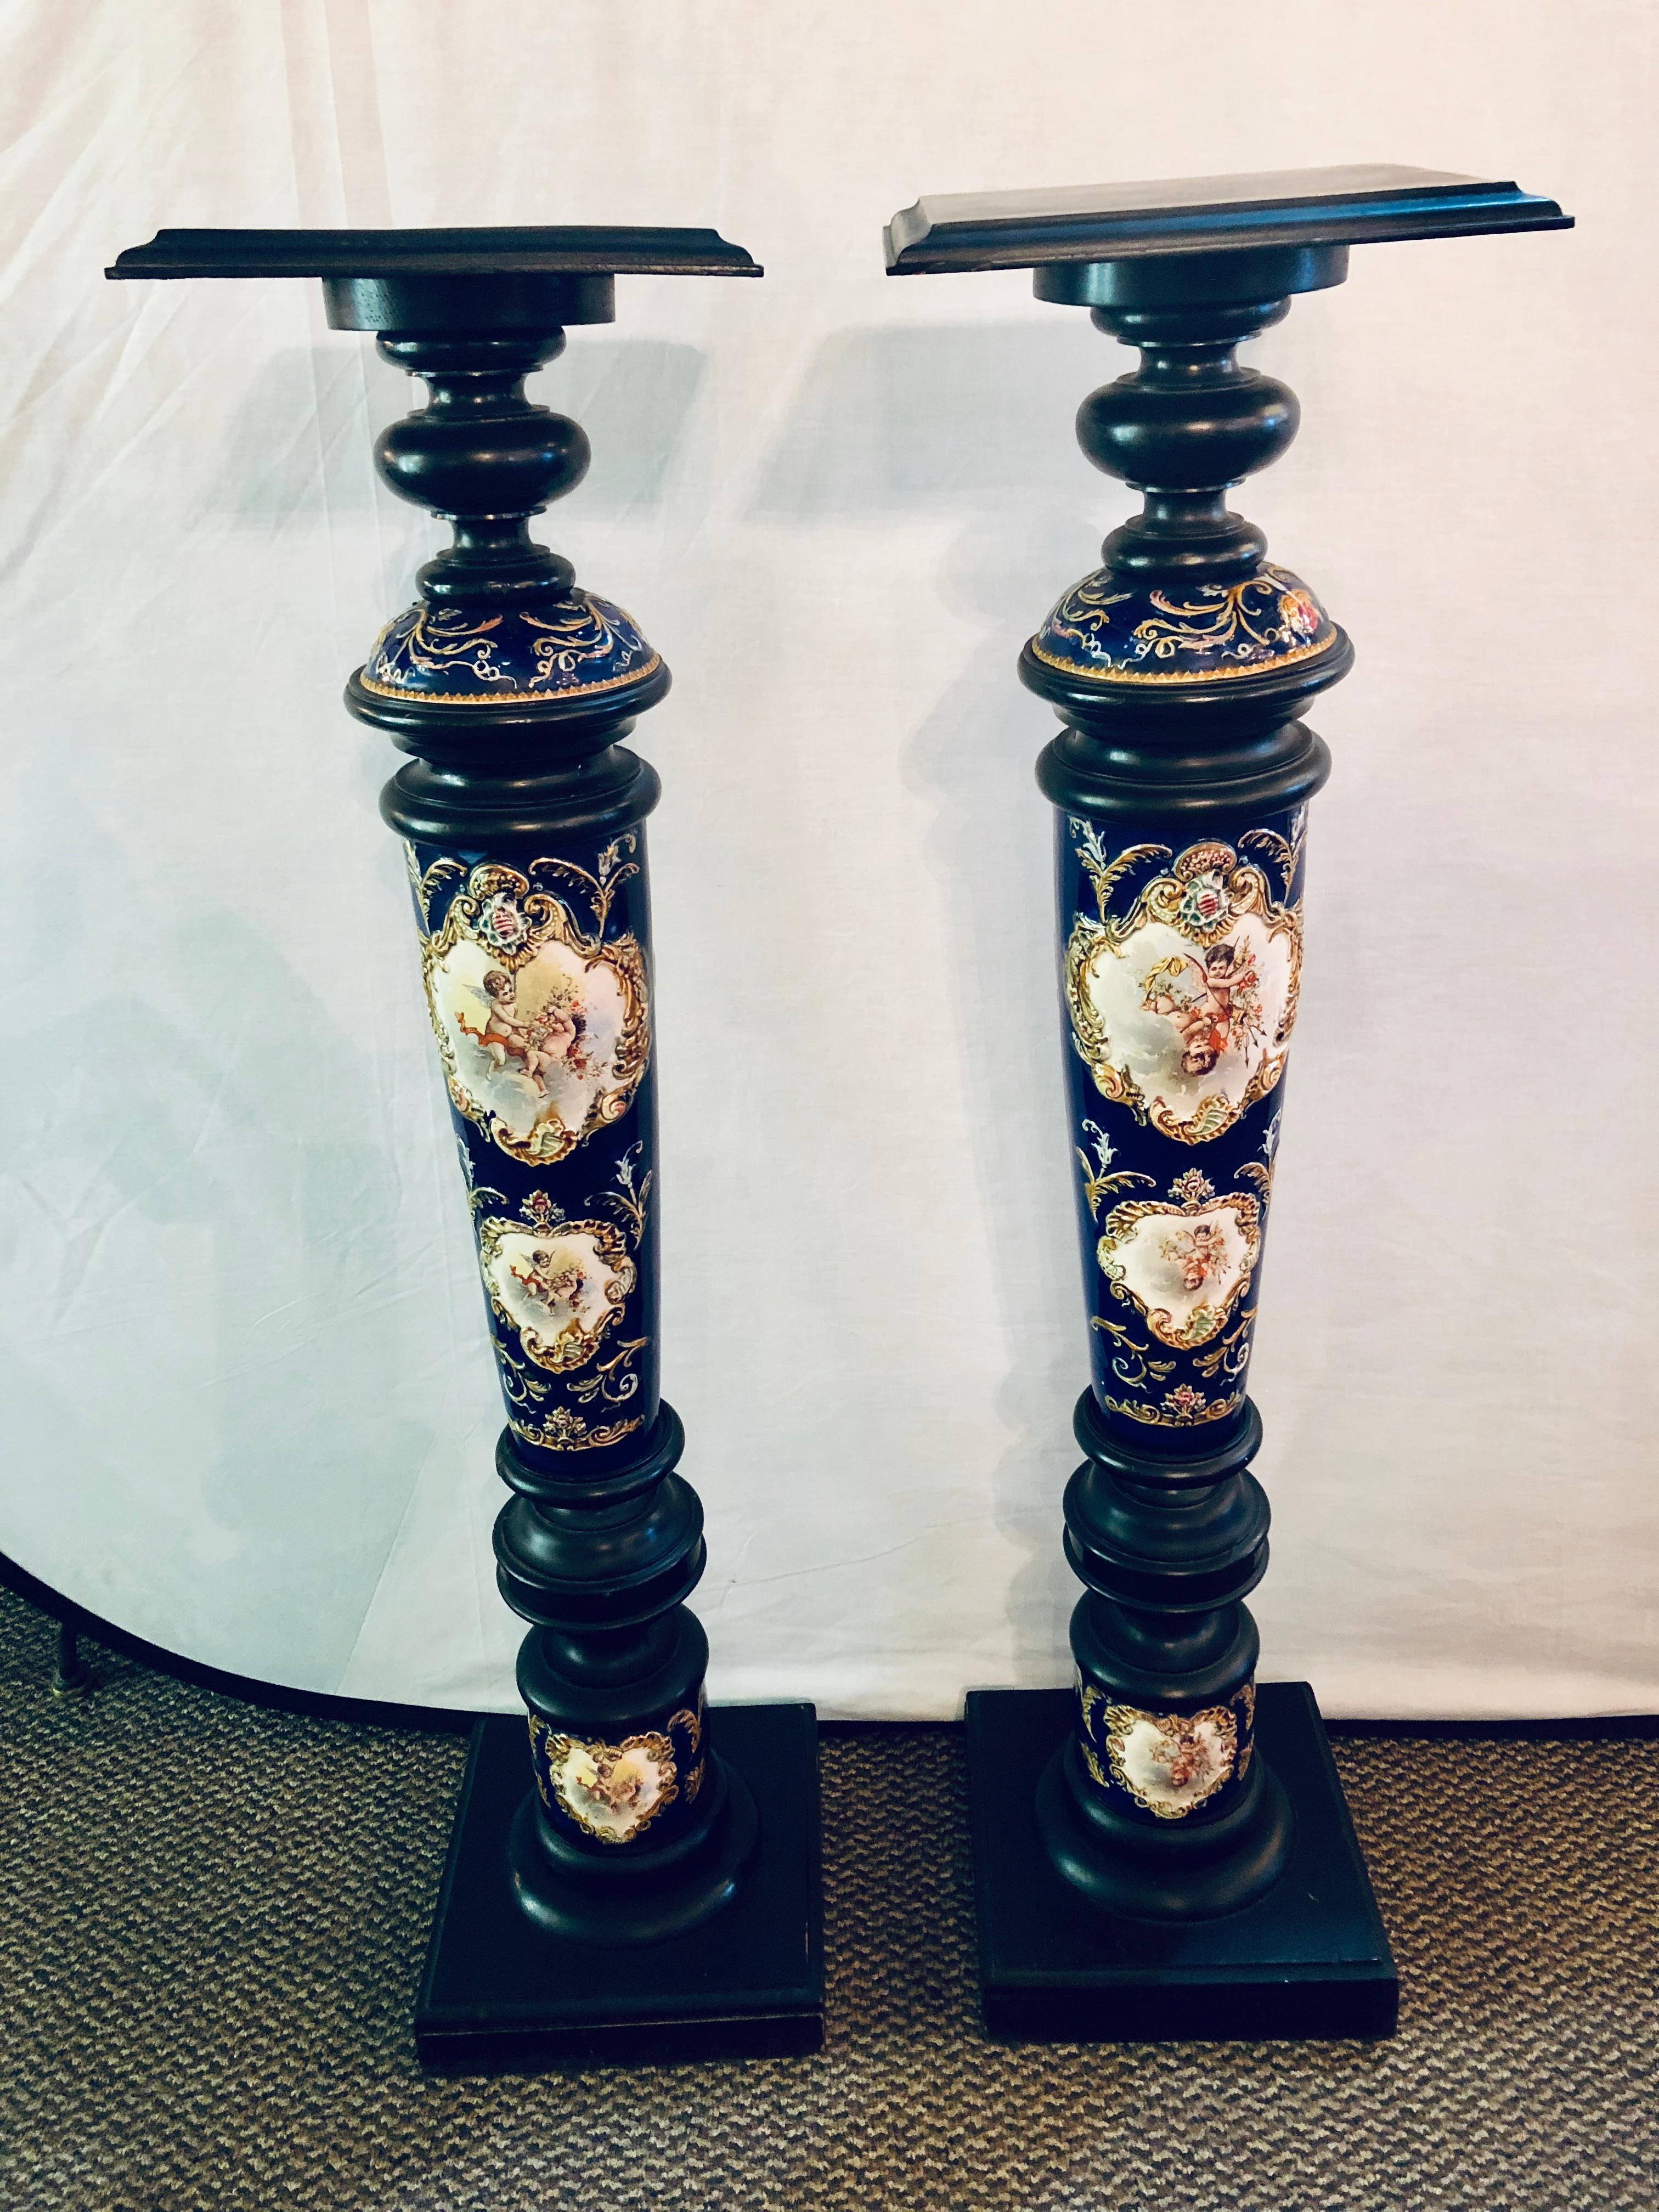 A pair of royal Vienna style porcelain and ebony column pedestals. A fine and highly decorative pair of pedestals each having ebony square table tops on wonderfully hand-painted porcelain cherub scene cobalt blue columns supported by ebony bottoms.